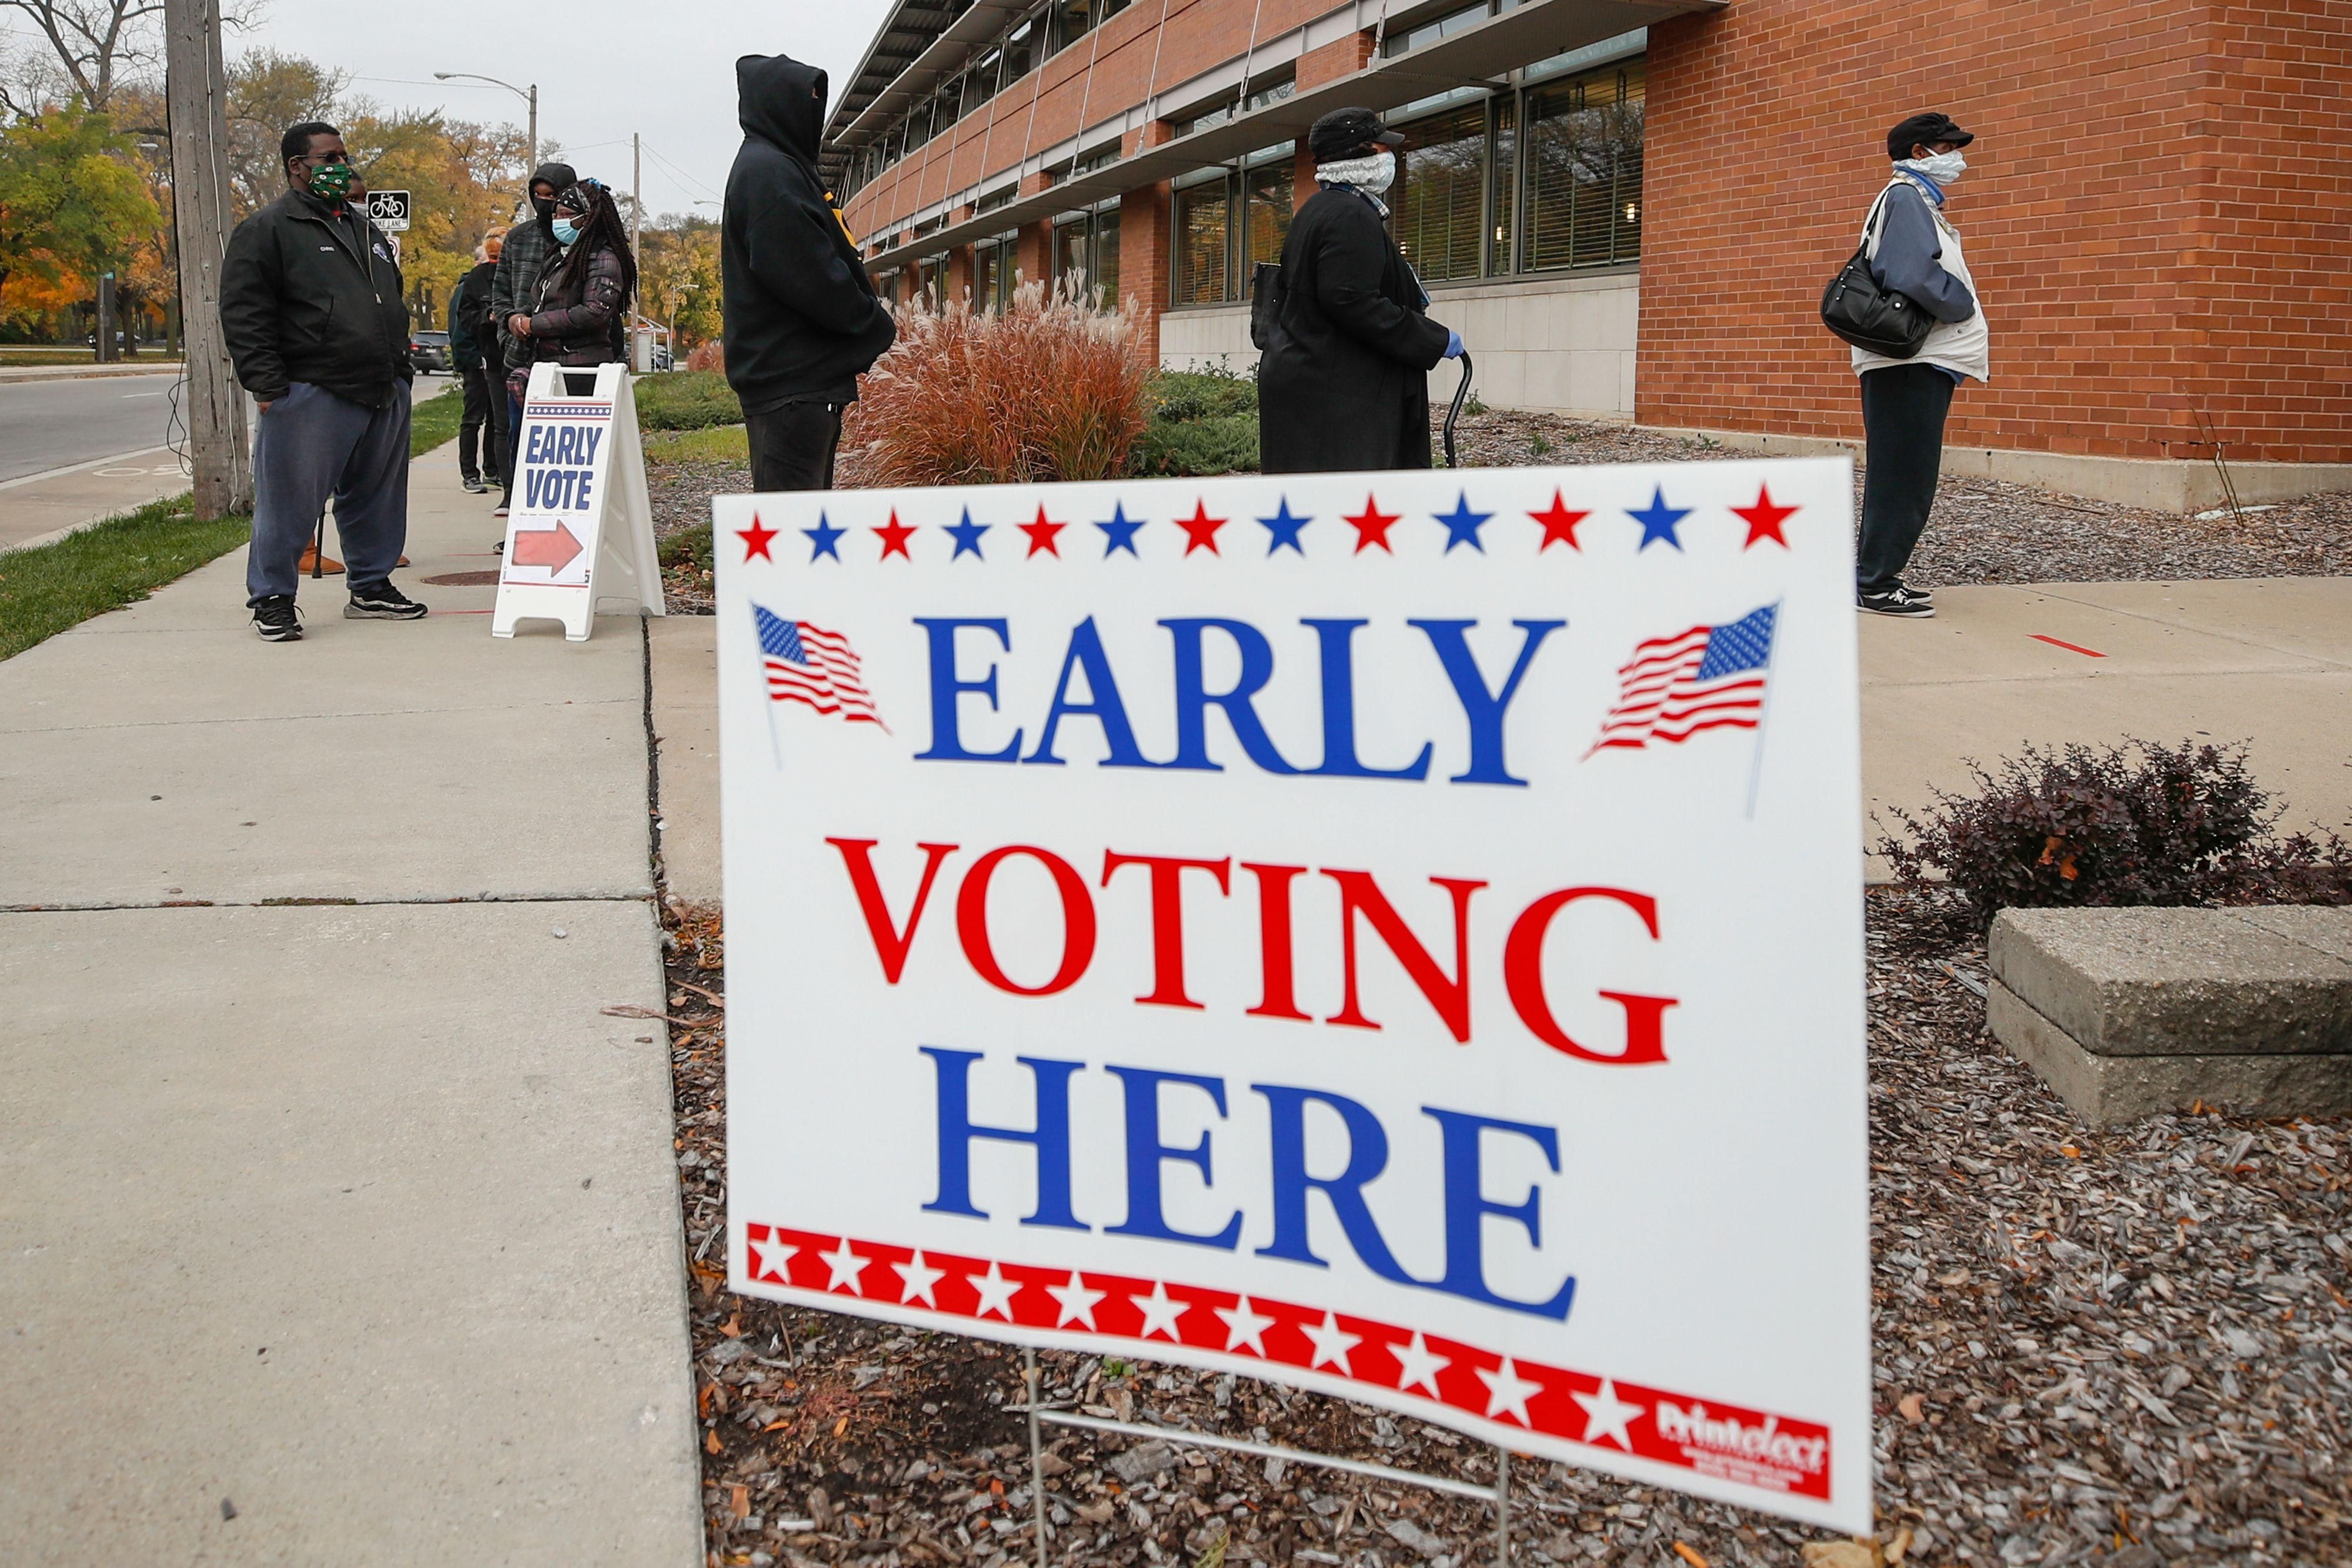 People wait in line outside the Washington Park Library to cast their ballots on the first day of in-person early voting in Milwaukee, Wisconsin on October 20, 2020. (Photo: Kamil Krzaczynski/AFP via Getty Images)